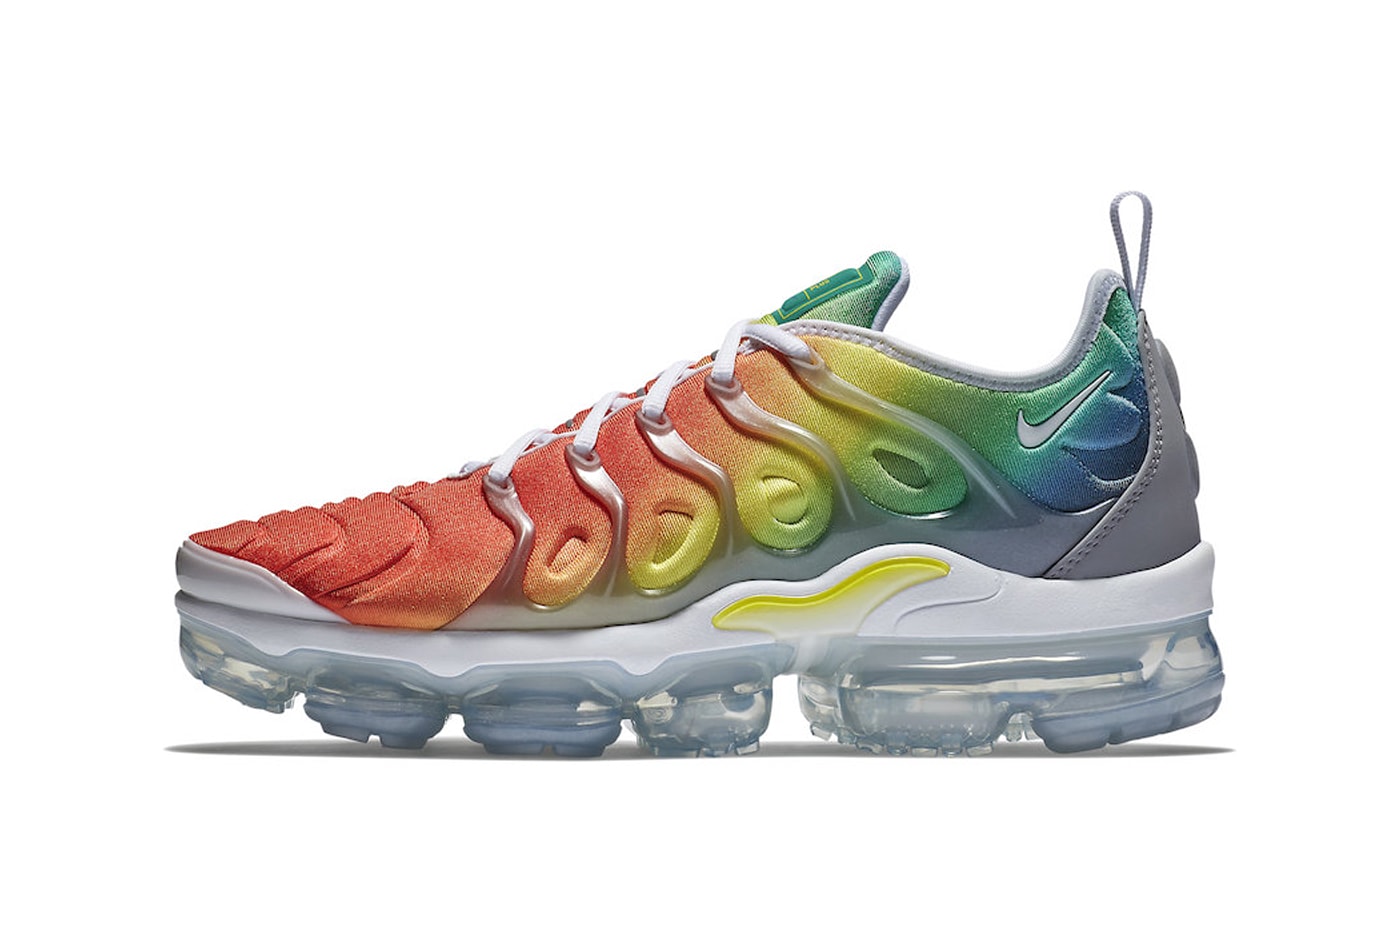 Nike Air Vapormax Plus Receives a "Rainbow" Iteration february release info White/Neptune Green-Dynamic Yellow-White Code: 924453-103 re release 